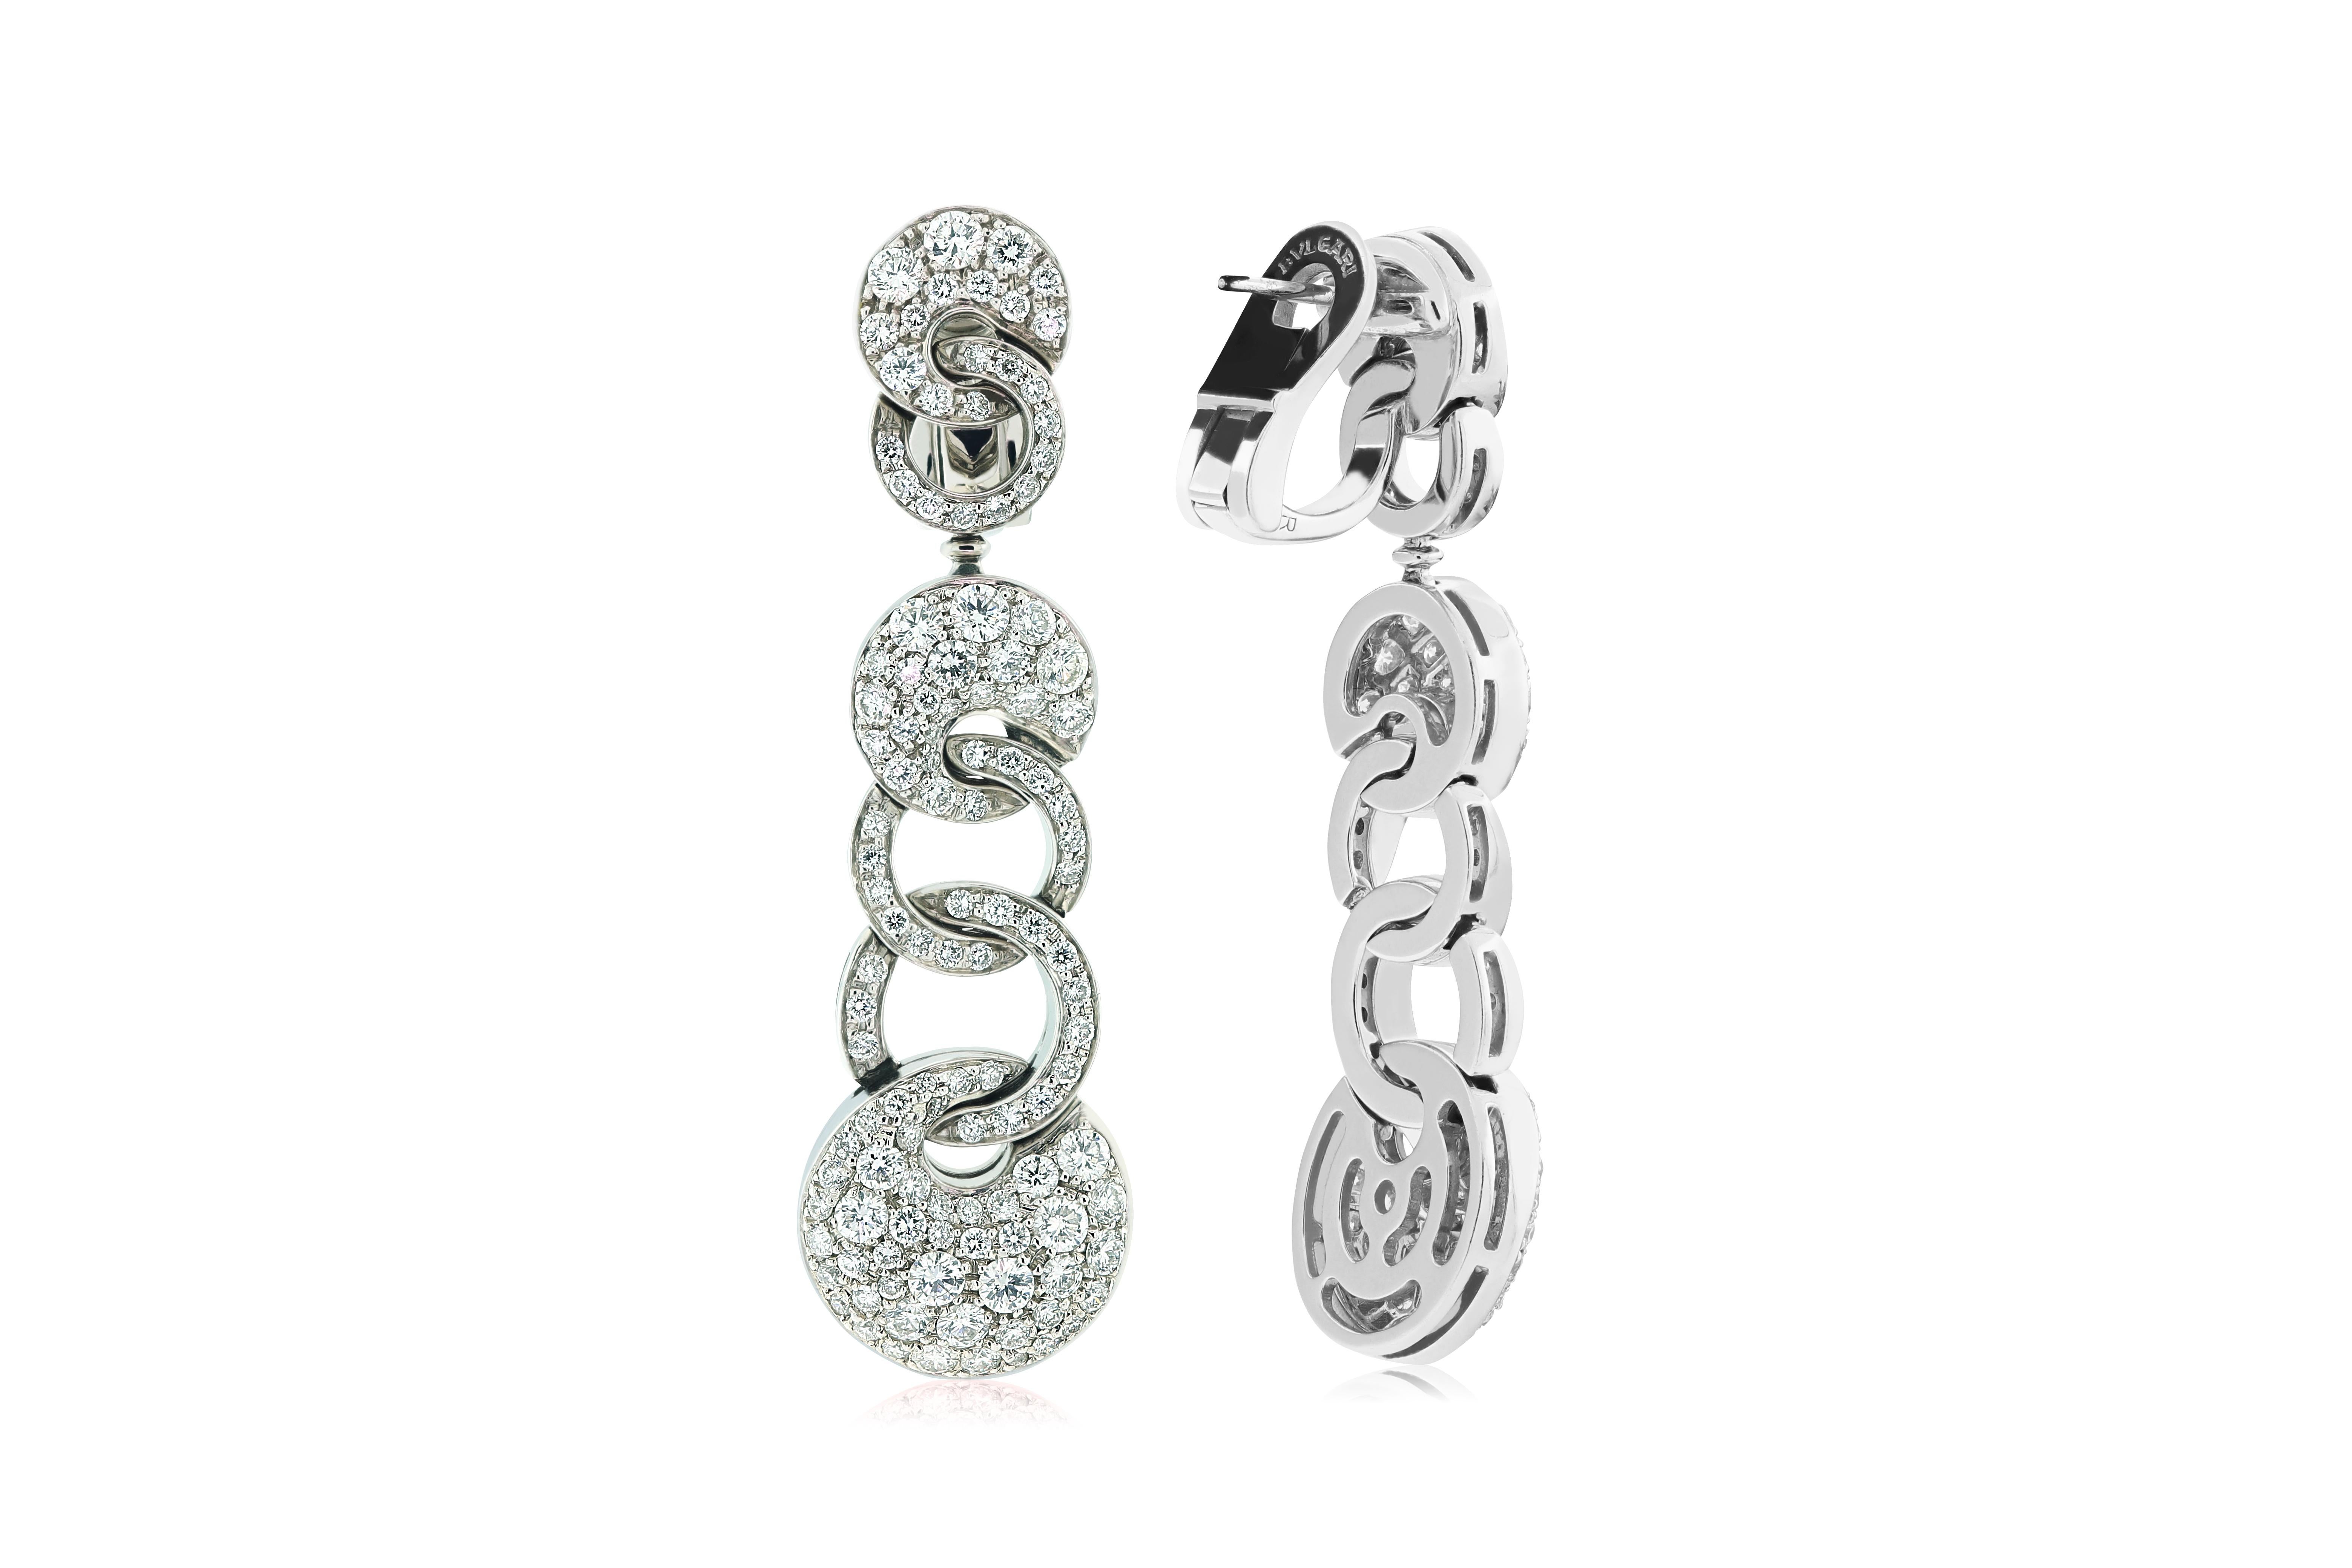 The BVLGARI dangle earrings feature approximately 2 carats of diamonds set in 18K white gold. Post back clip combo. Inscribed BVLGARI.